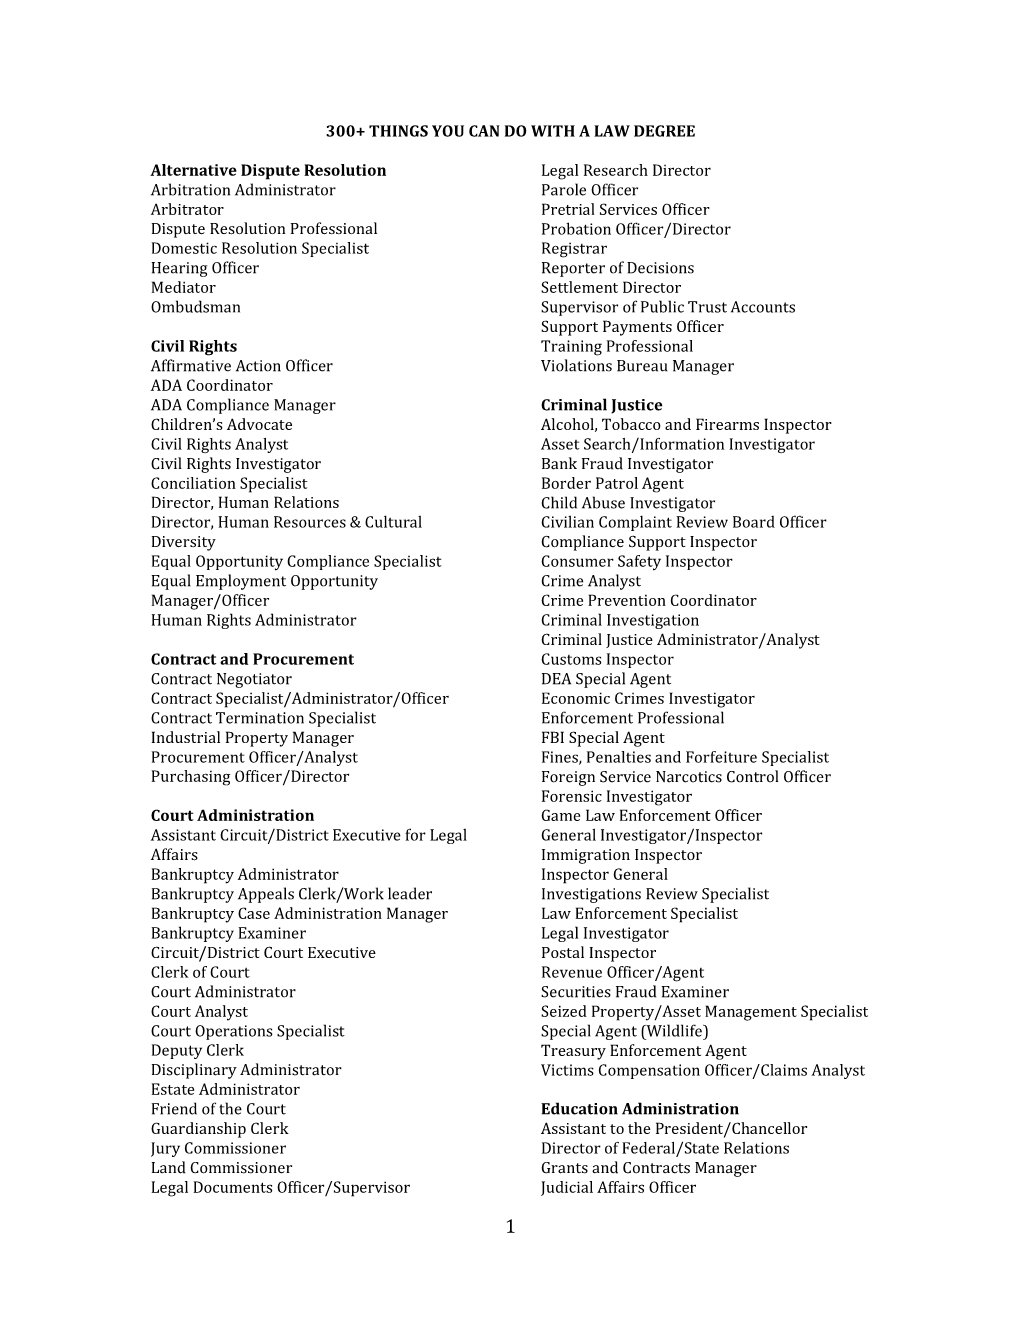 300 Things You Can Do with a Law Degree (Pdf)